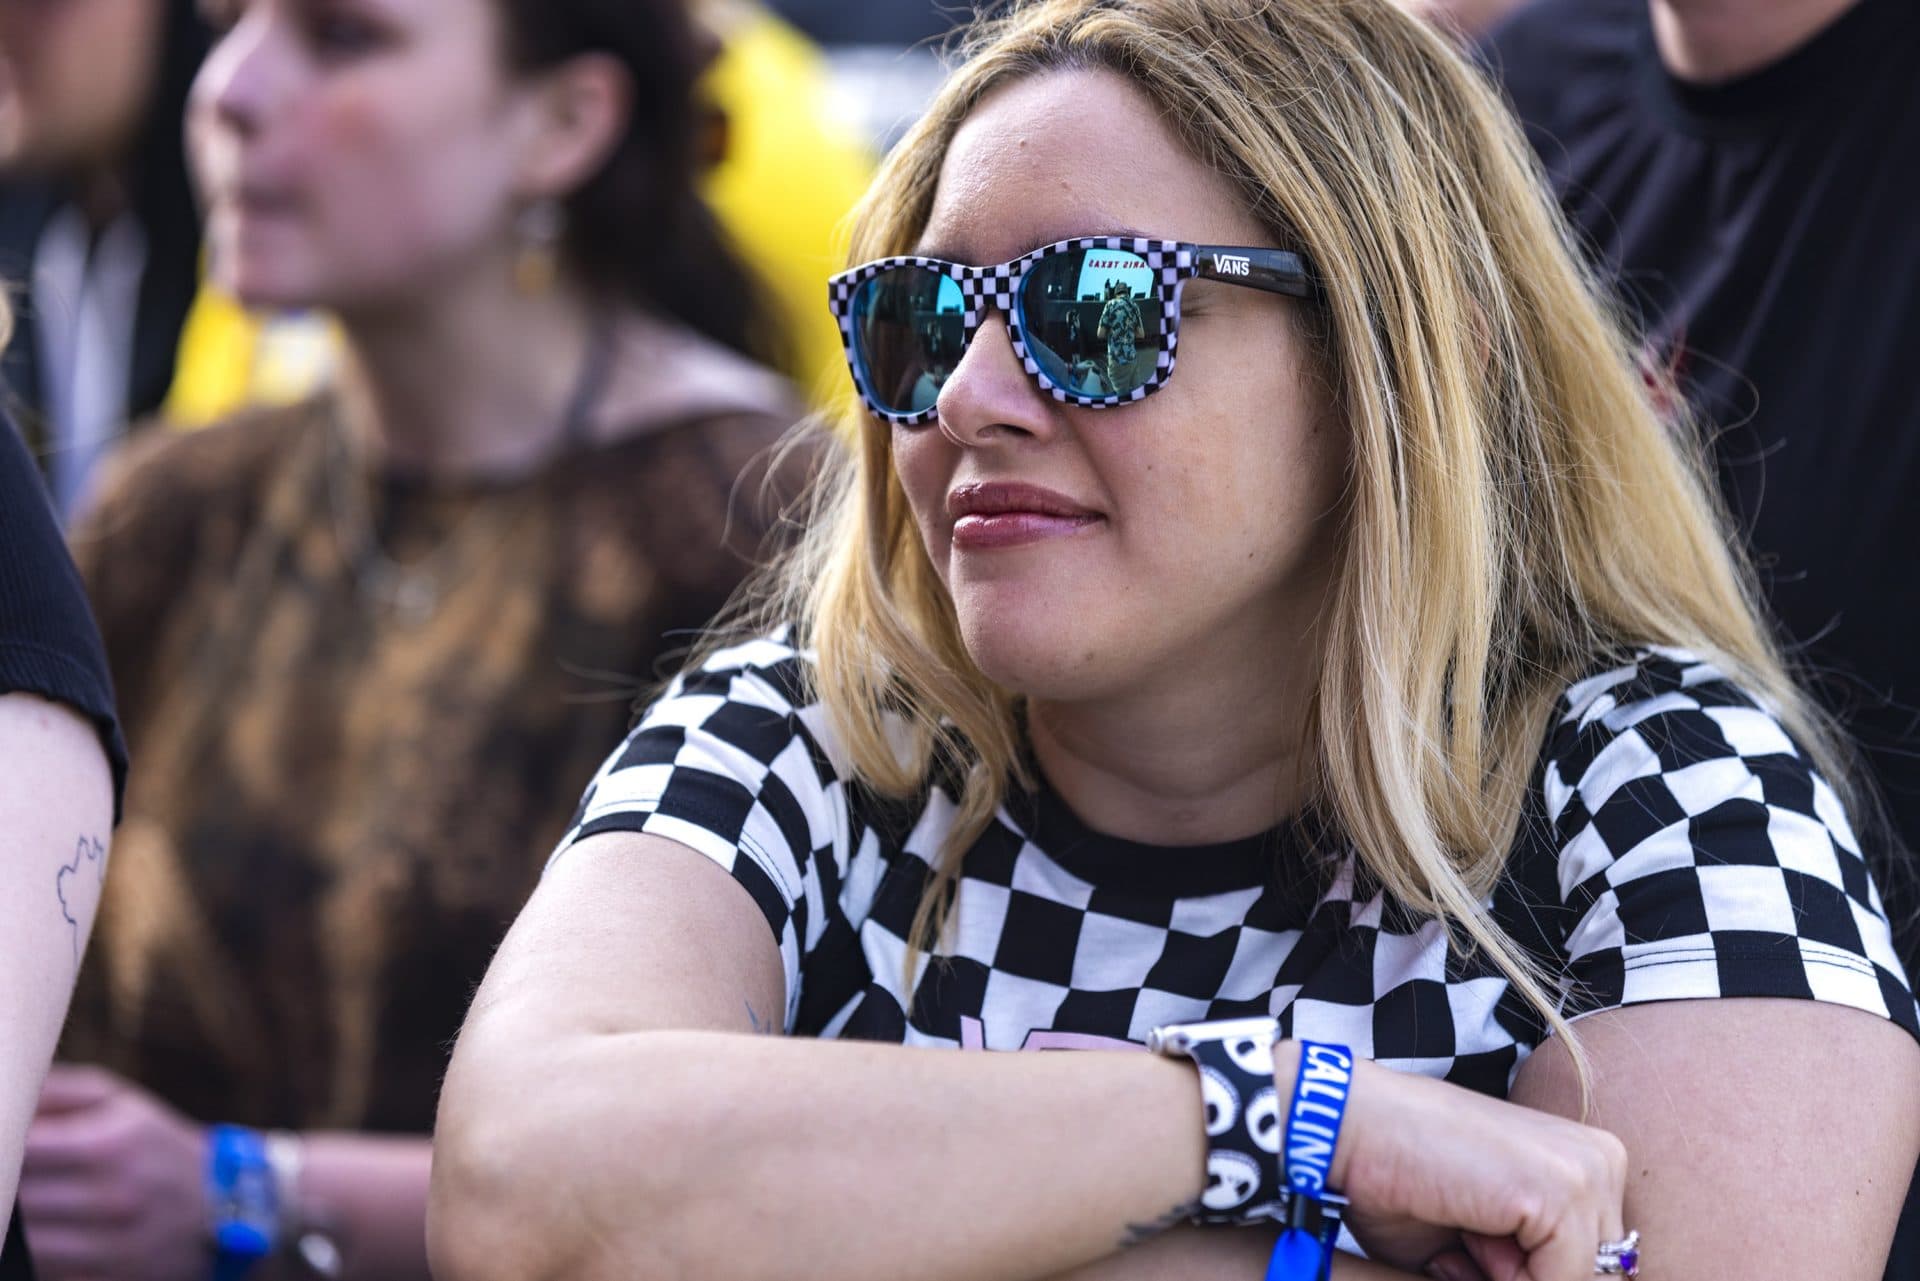 A festival goer in the front row watches Paris, Texas. (Jesse costa/WBUR)